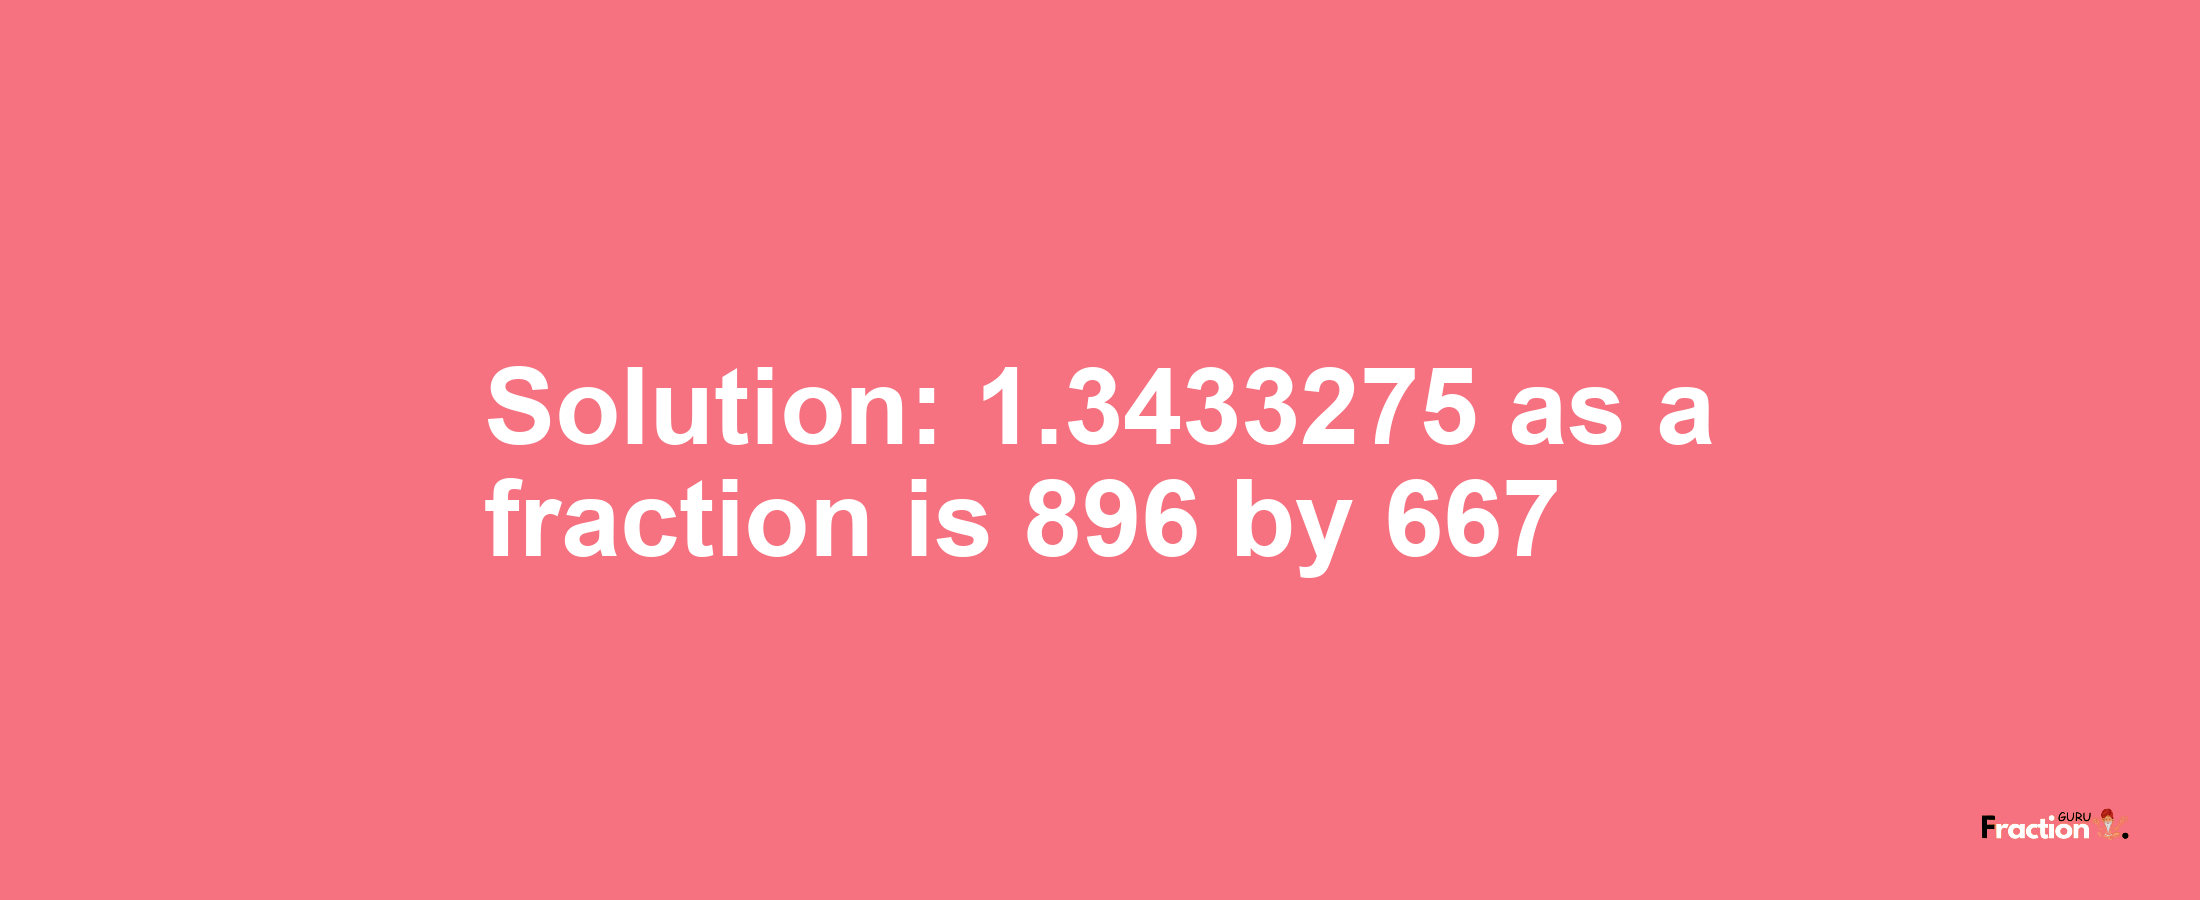 Solution:1.3433275 as a fraction is 896/667